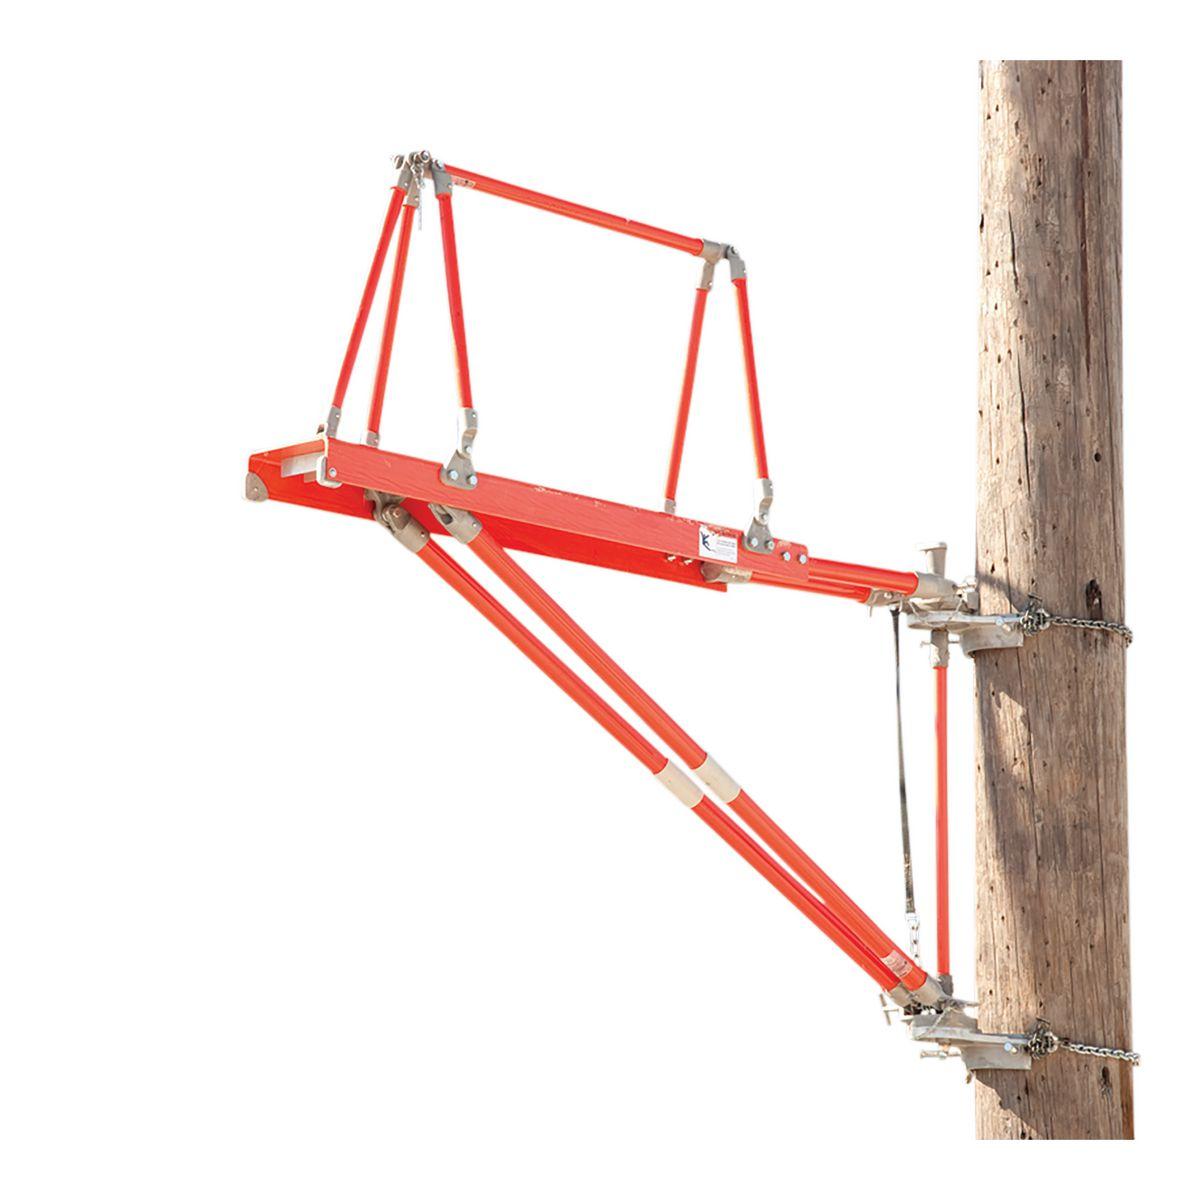 Hubbell C4021043 Unique design features 12" of clear insulation provided by two 2"-diameter orange  Epoxiglas poles connecting the platform to the mounting bracket. No other platforms include these insulating members, manufactured to the same exacting standards as Chance 